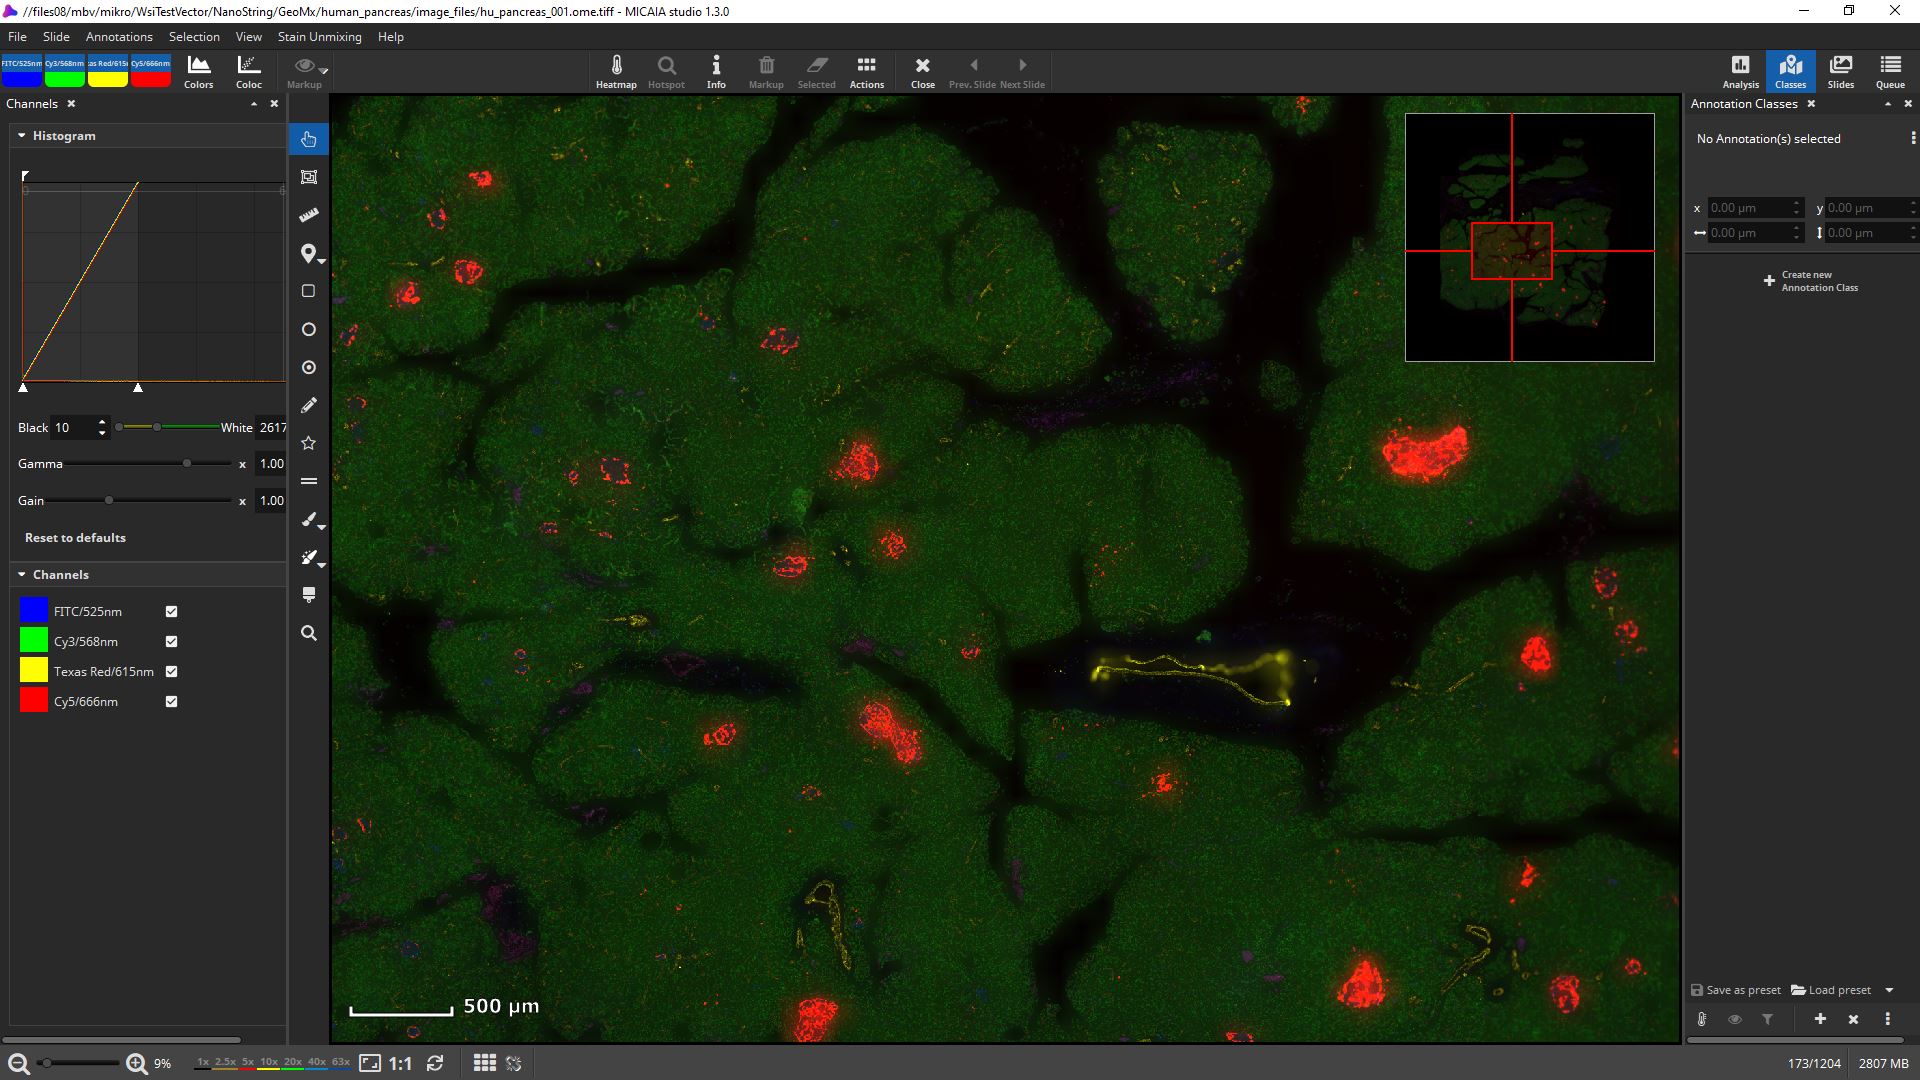 "Human Pancreas" scanned with NanoString GeoMx DSP (slide copyright @ NanoString) 